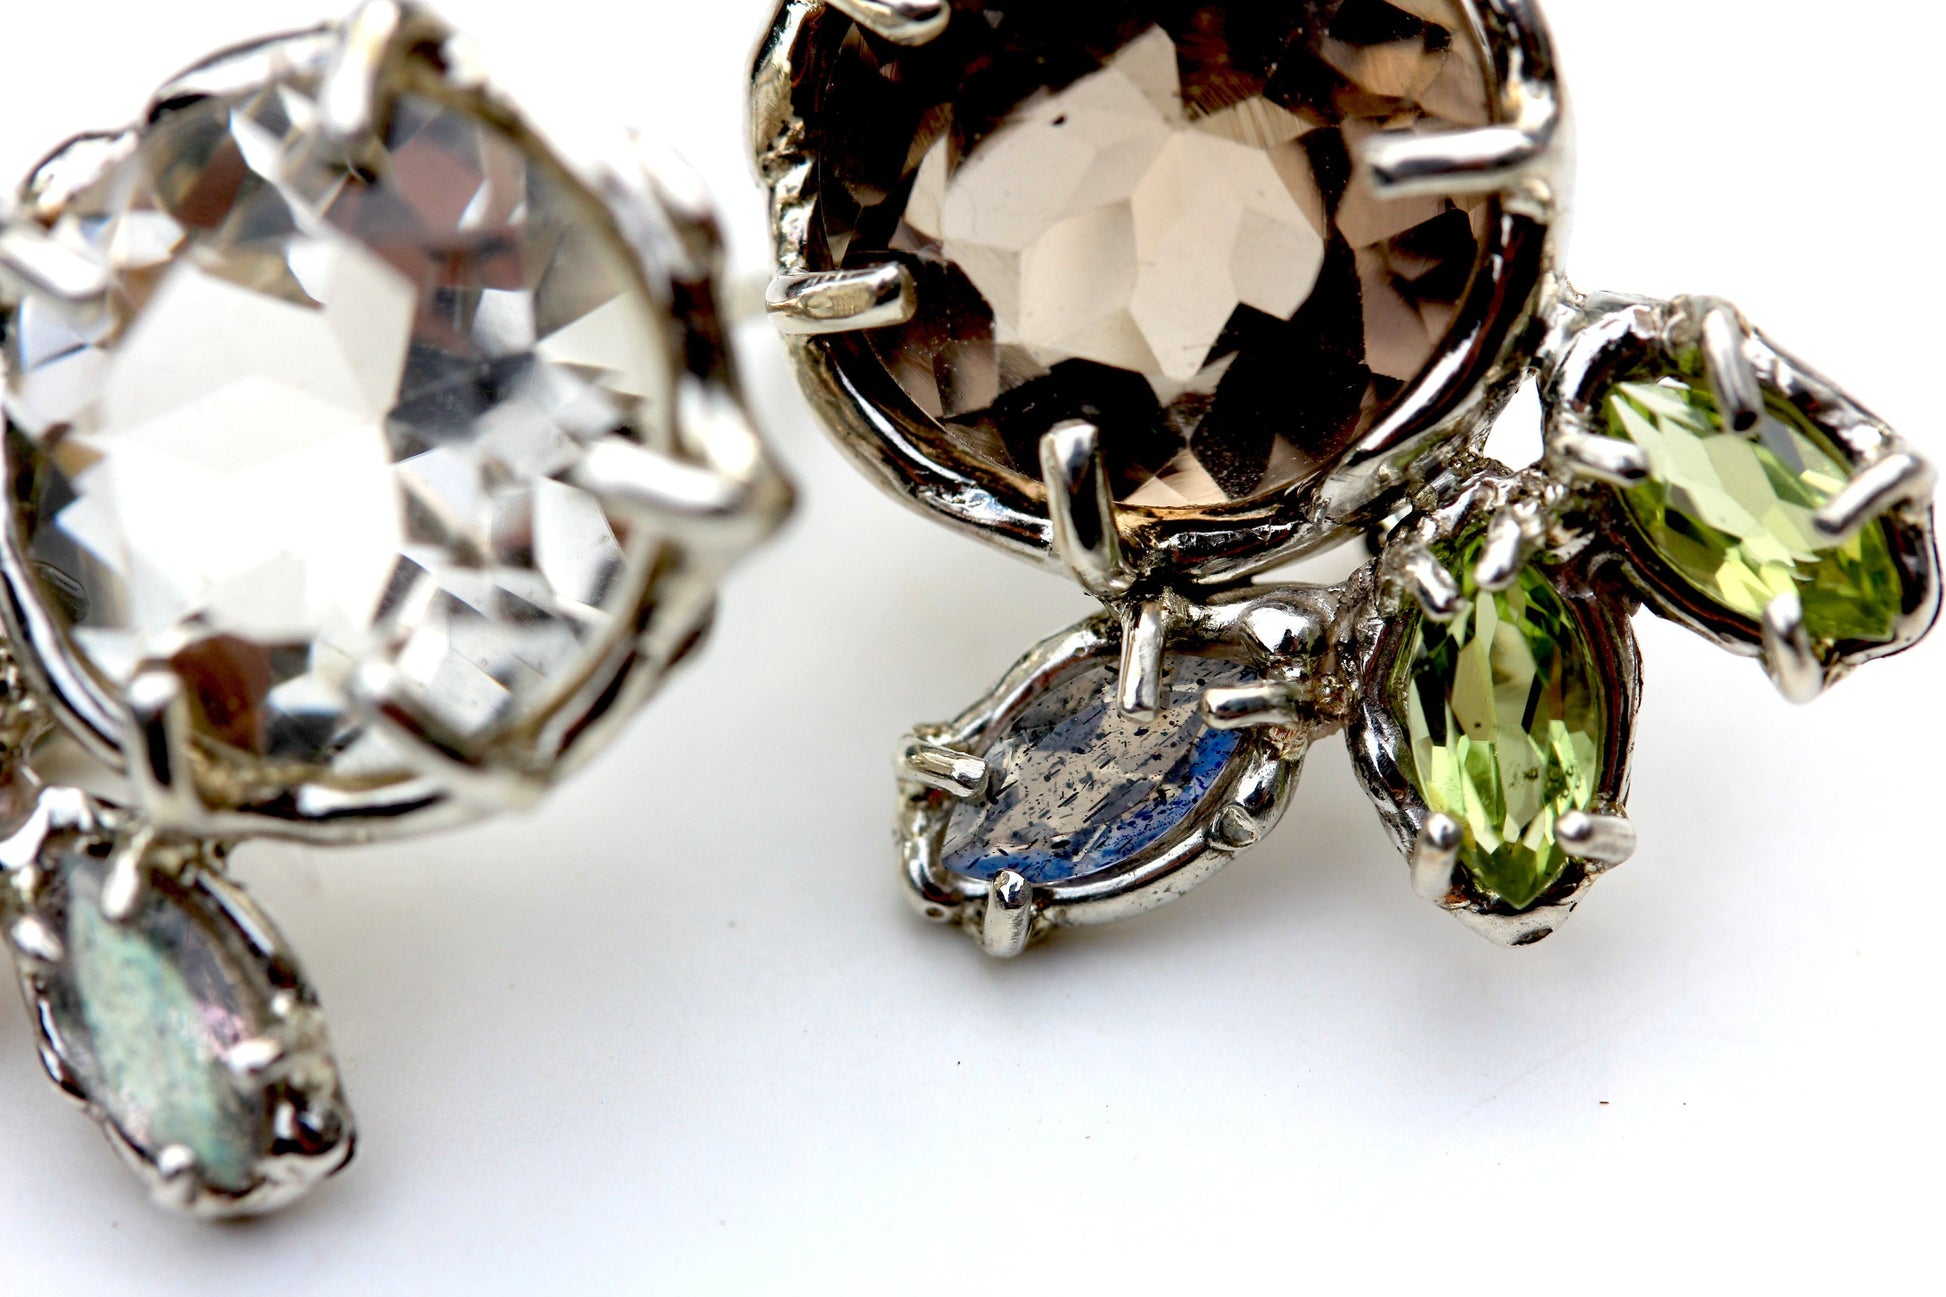 Detail photos of A subtly mismatched pair of earrings in Smoky Quartz, Peridot, Labradorite and Sterling Silver.